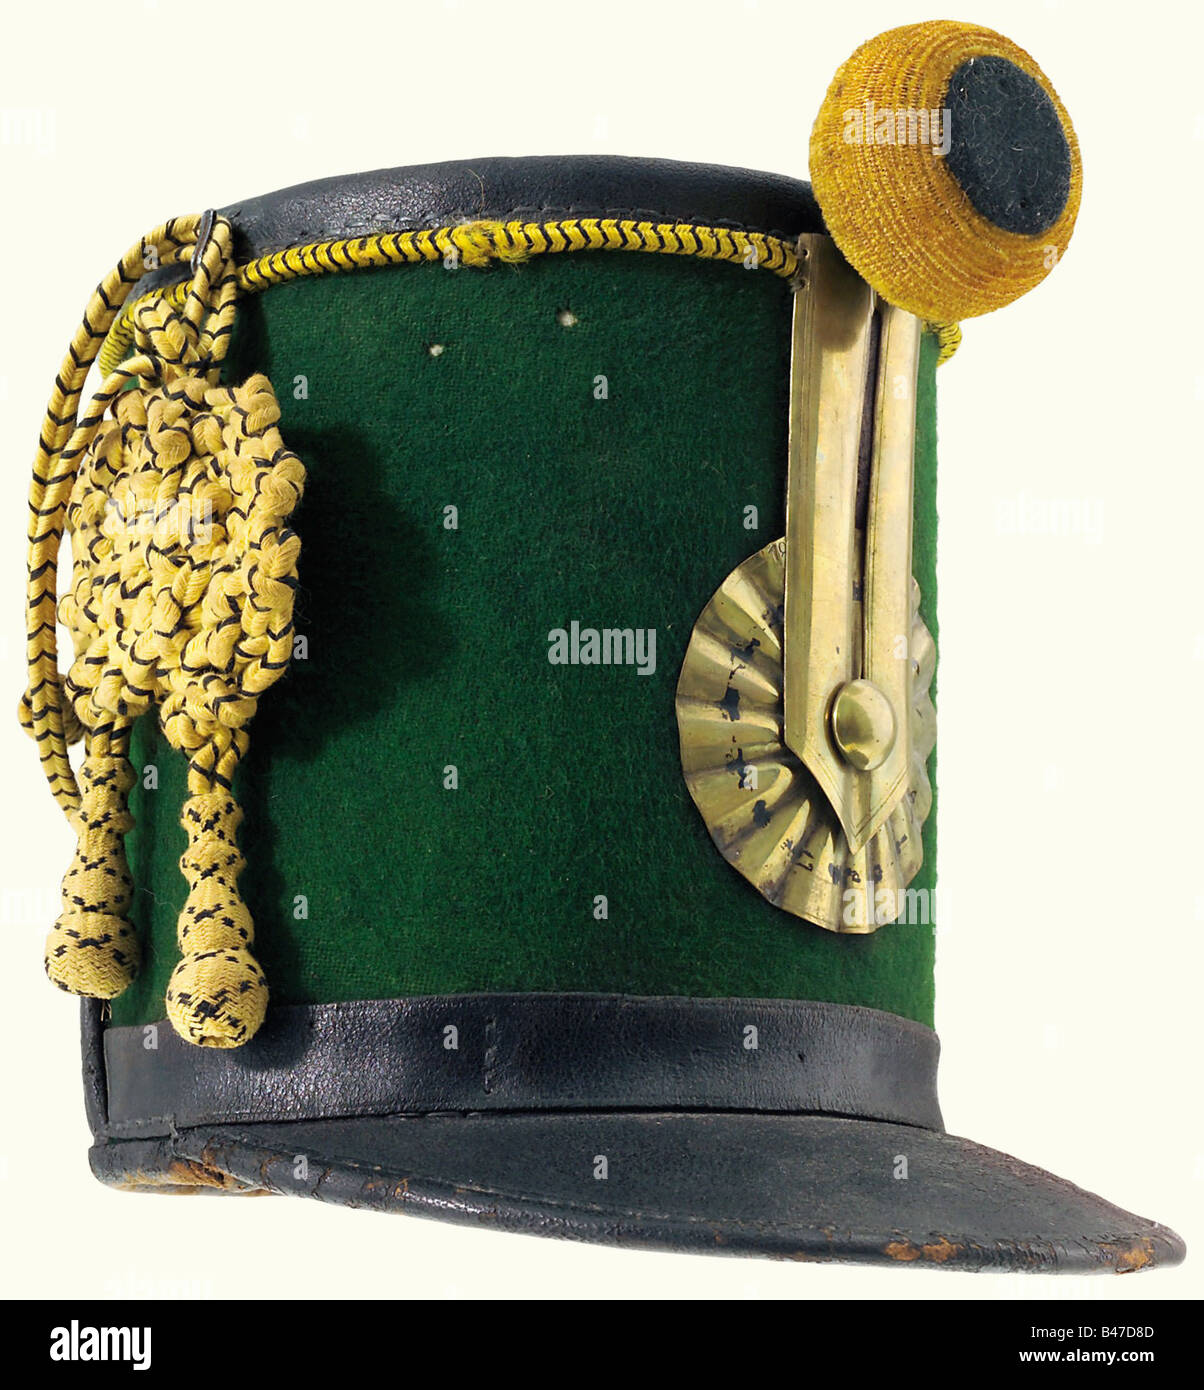 Austria: A shako of 1816 pattern for troopers, of the 10th(?) Hussar s Regiment. Cardboard body covered with green cloth, leather top, band and visor. The peak brim fixed to the body. Black interwoven yellow square lace and Vitez Kötez. Sweat leather, barracan lining, leather strap. Yellow/black field insignia, brass cockade and agraffe (marked '18'). Height of the body 21 cm. Fresh colours, three small moth holes. A rare shako in good condition. historic, historical, 19th century, uniform, uniforms, clothing, clothes, outfit, outfits, wear, object, objects, st, Stock Photo